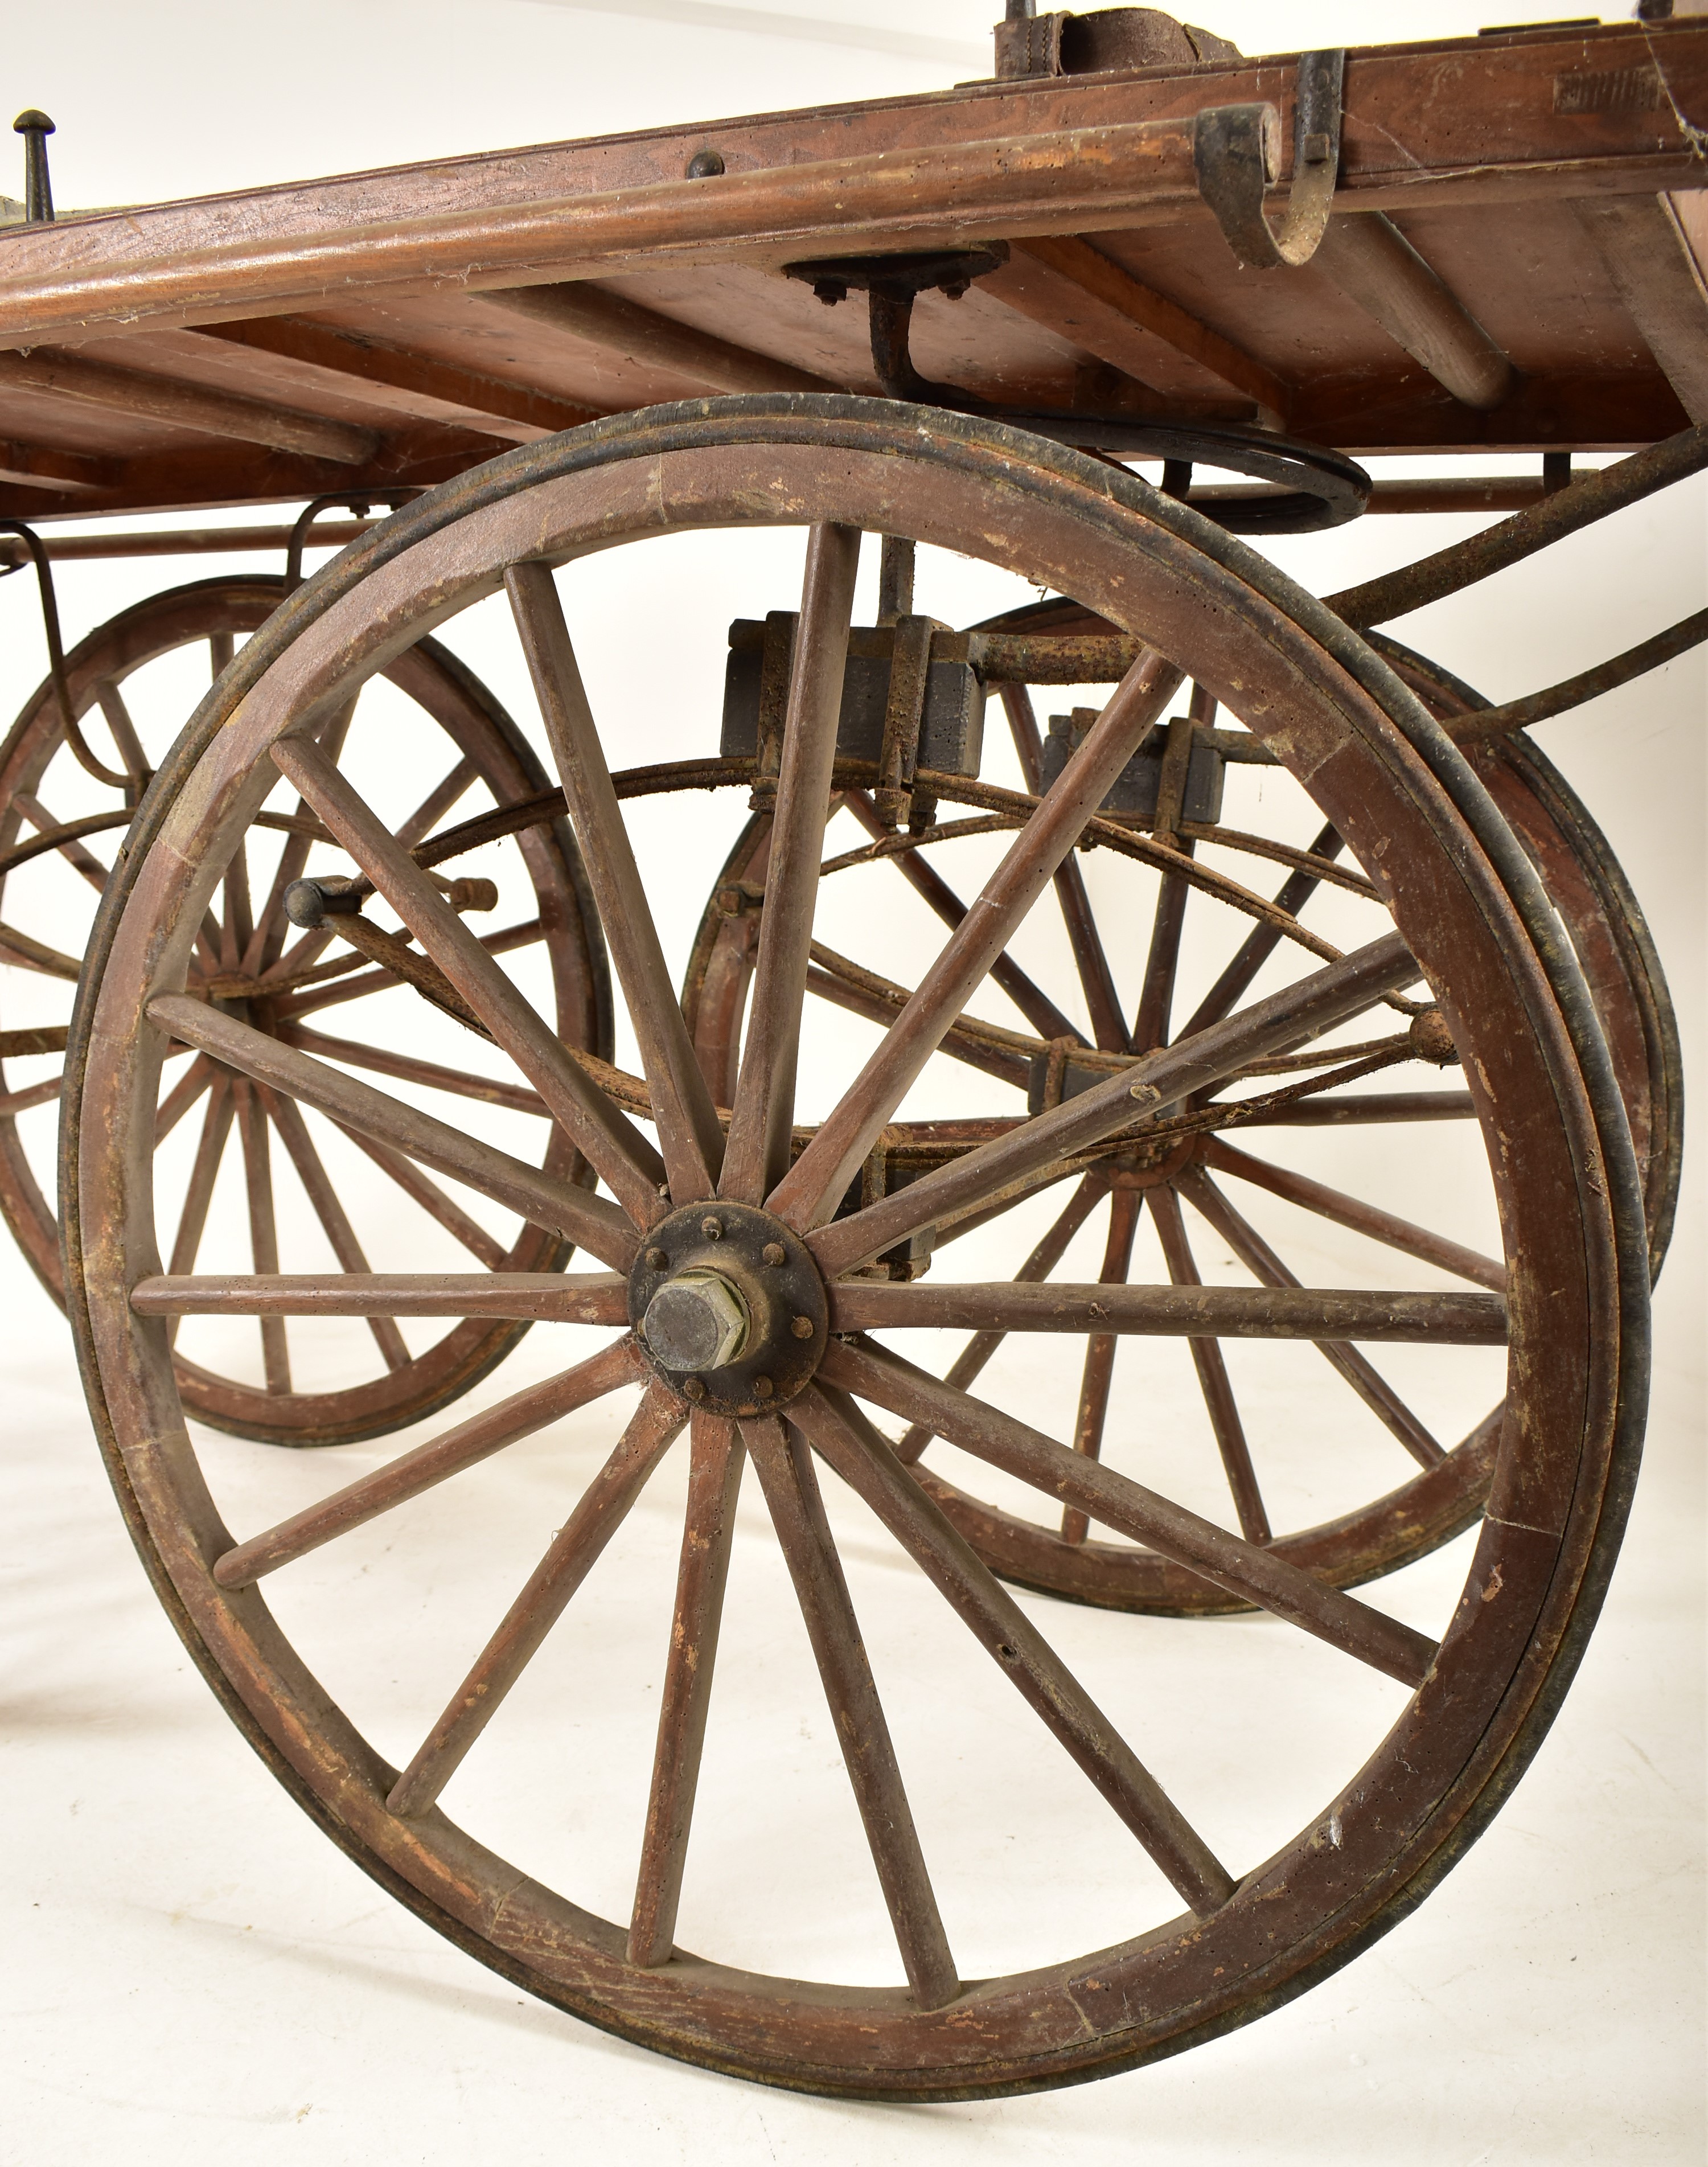 LATE 19TH CENTURY MACKNESS OF CHIPPENHAM BIER CARRIAGE - Image 4 of 5